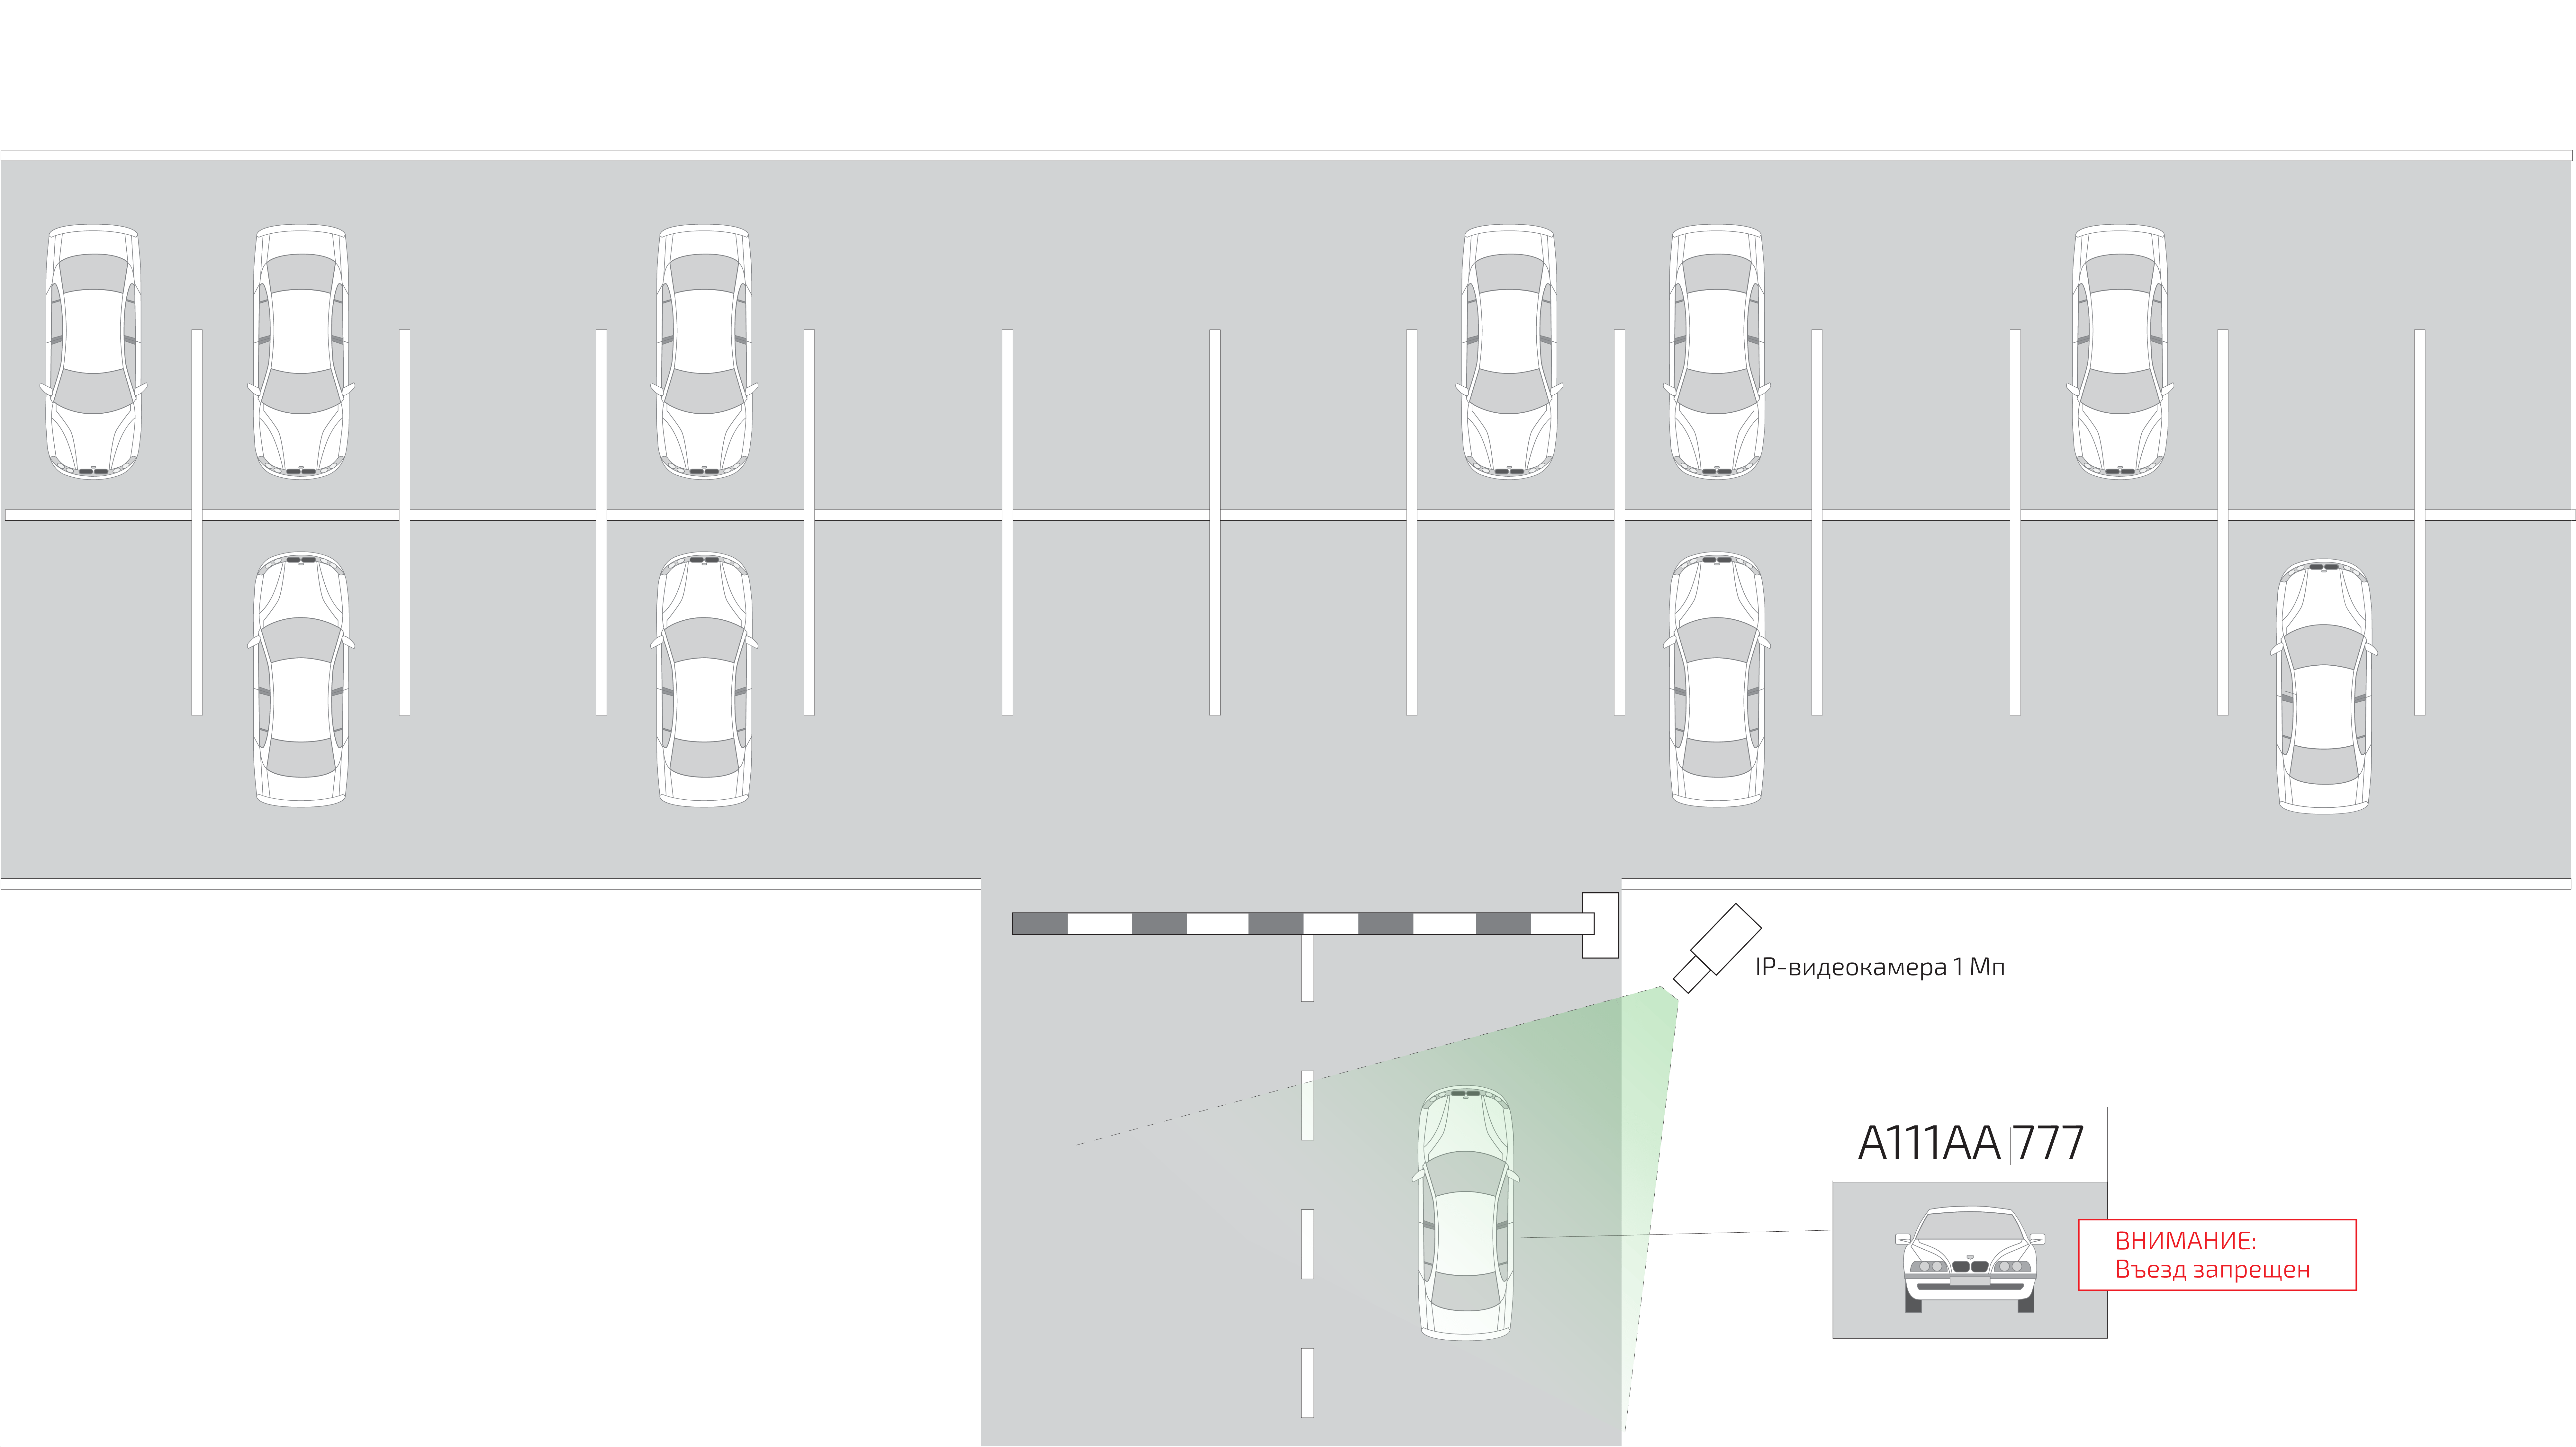 NUMBER-PLATE RECOGNITION SYSTEM